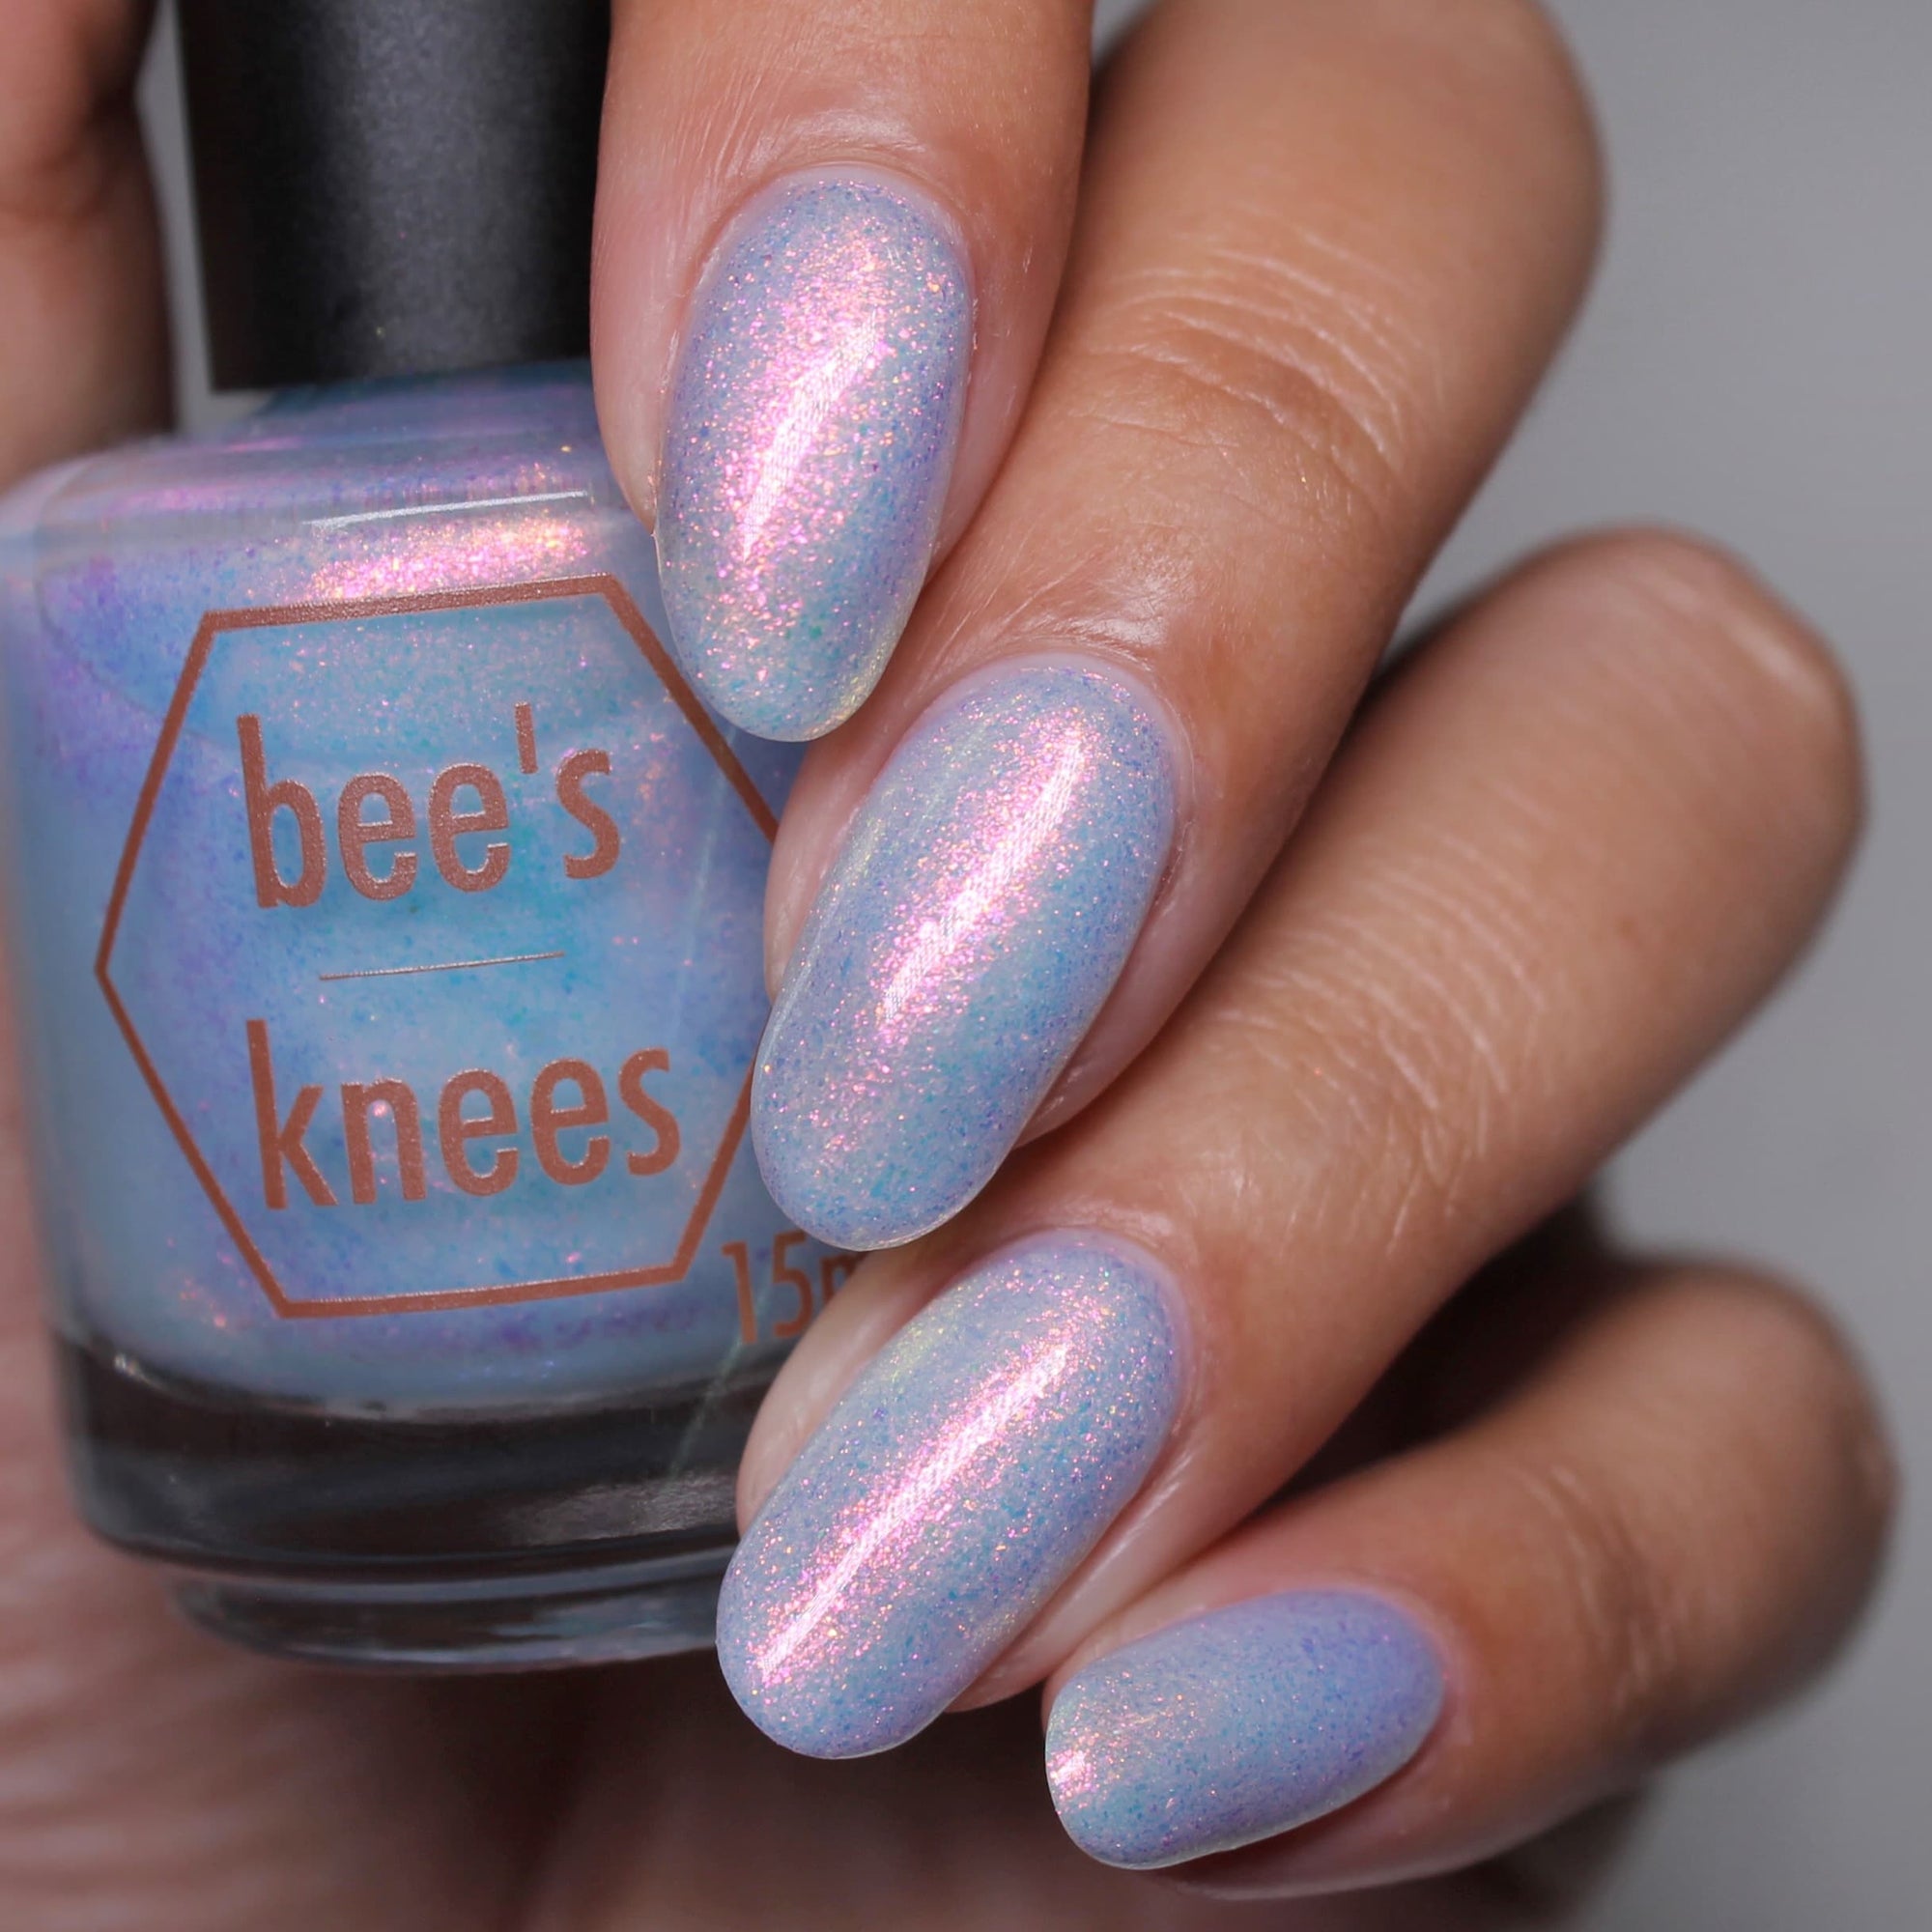 *PRE-ORDER* Bee's Knees Lacquer - The Celestial Kingdom